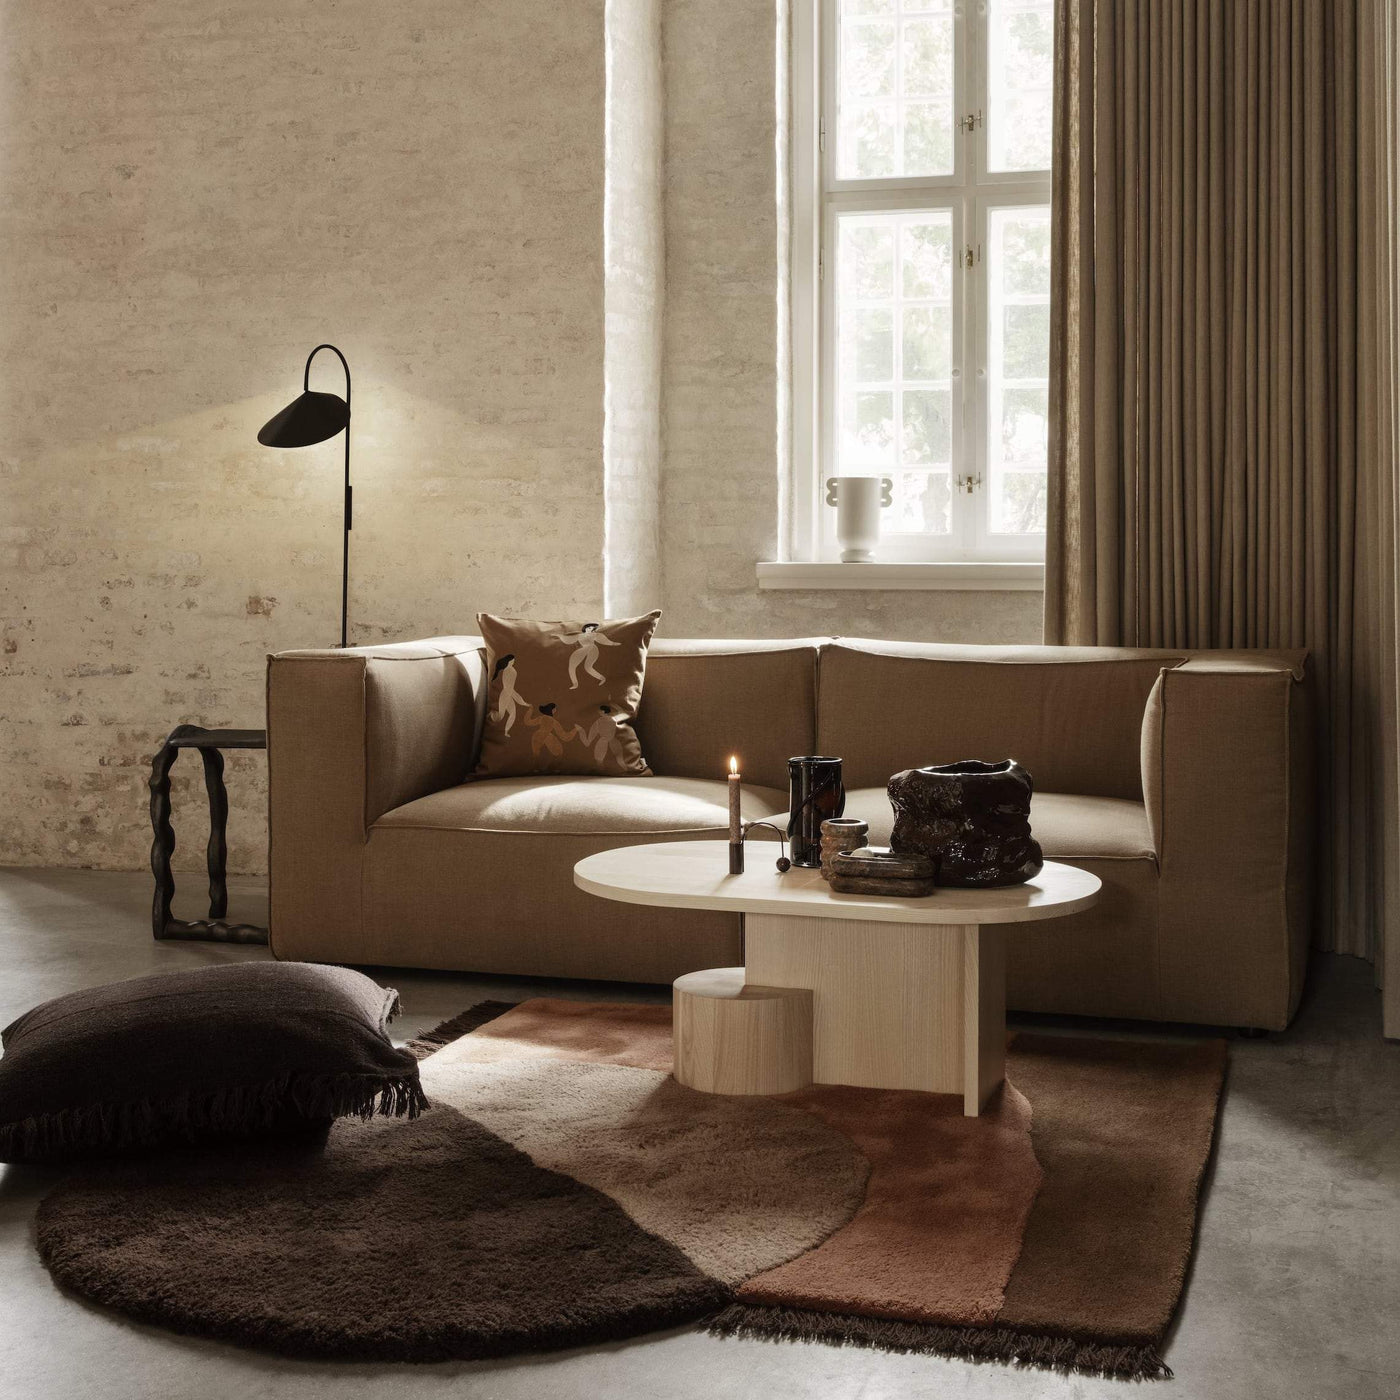 Ferm Living Catena Modular Sofa Series. Made to order from someday designs   #colour_hot-madison